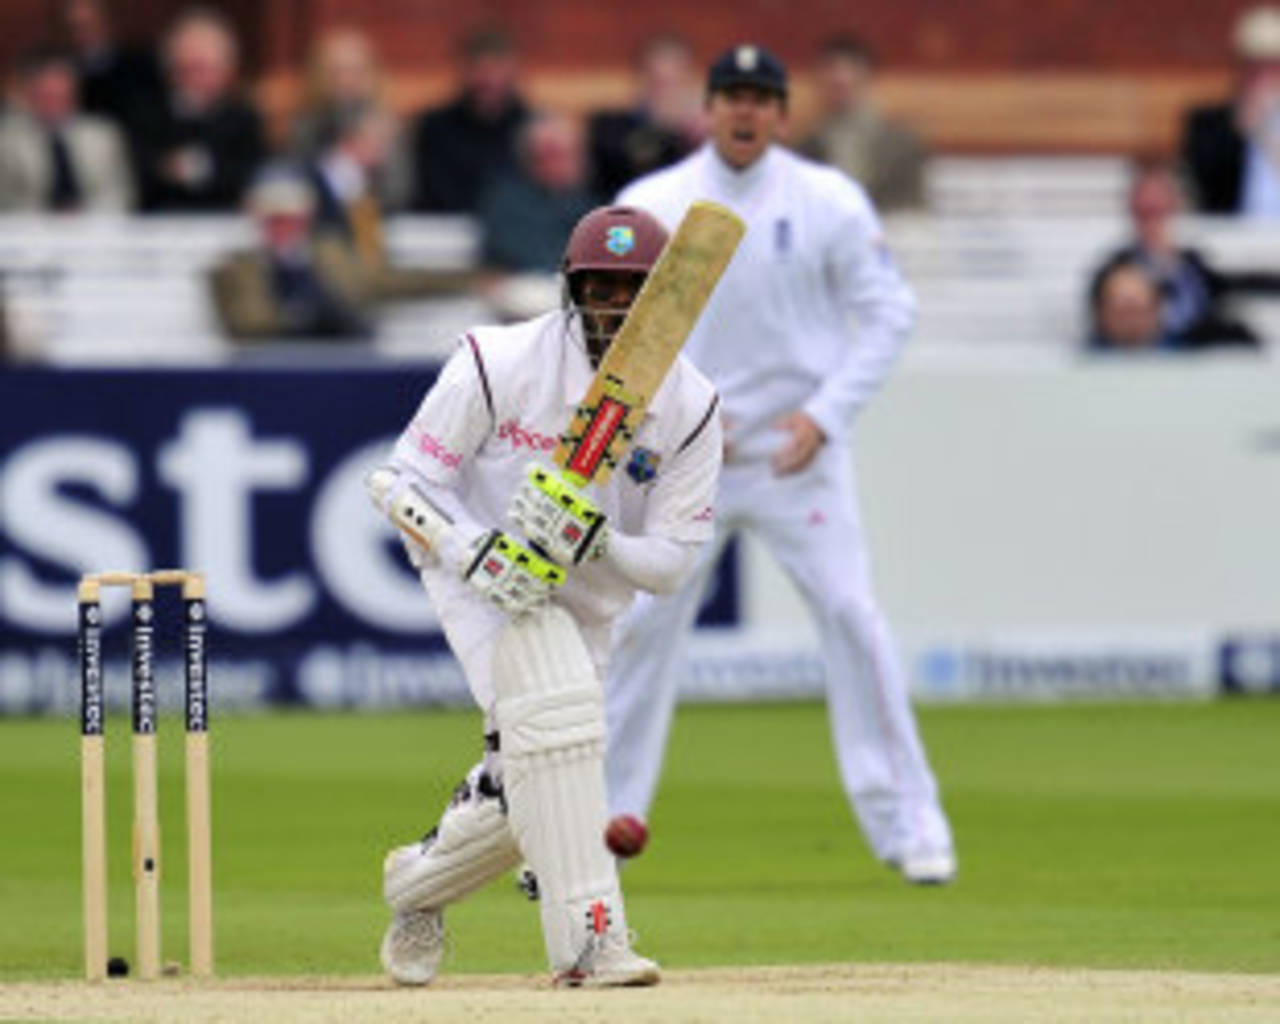 Shivnarine Chanderpaul continued his defiance, England v West Indies, 1st Test, Lord's, 4th day, May 20, 2012